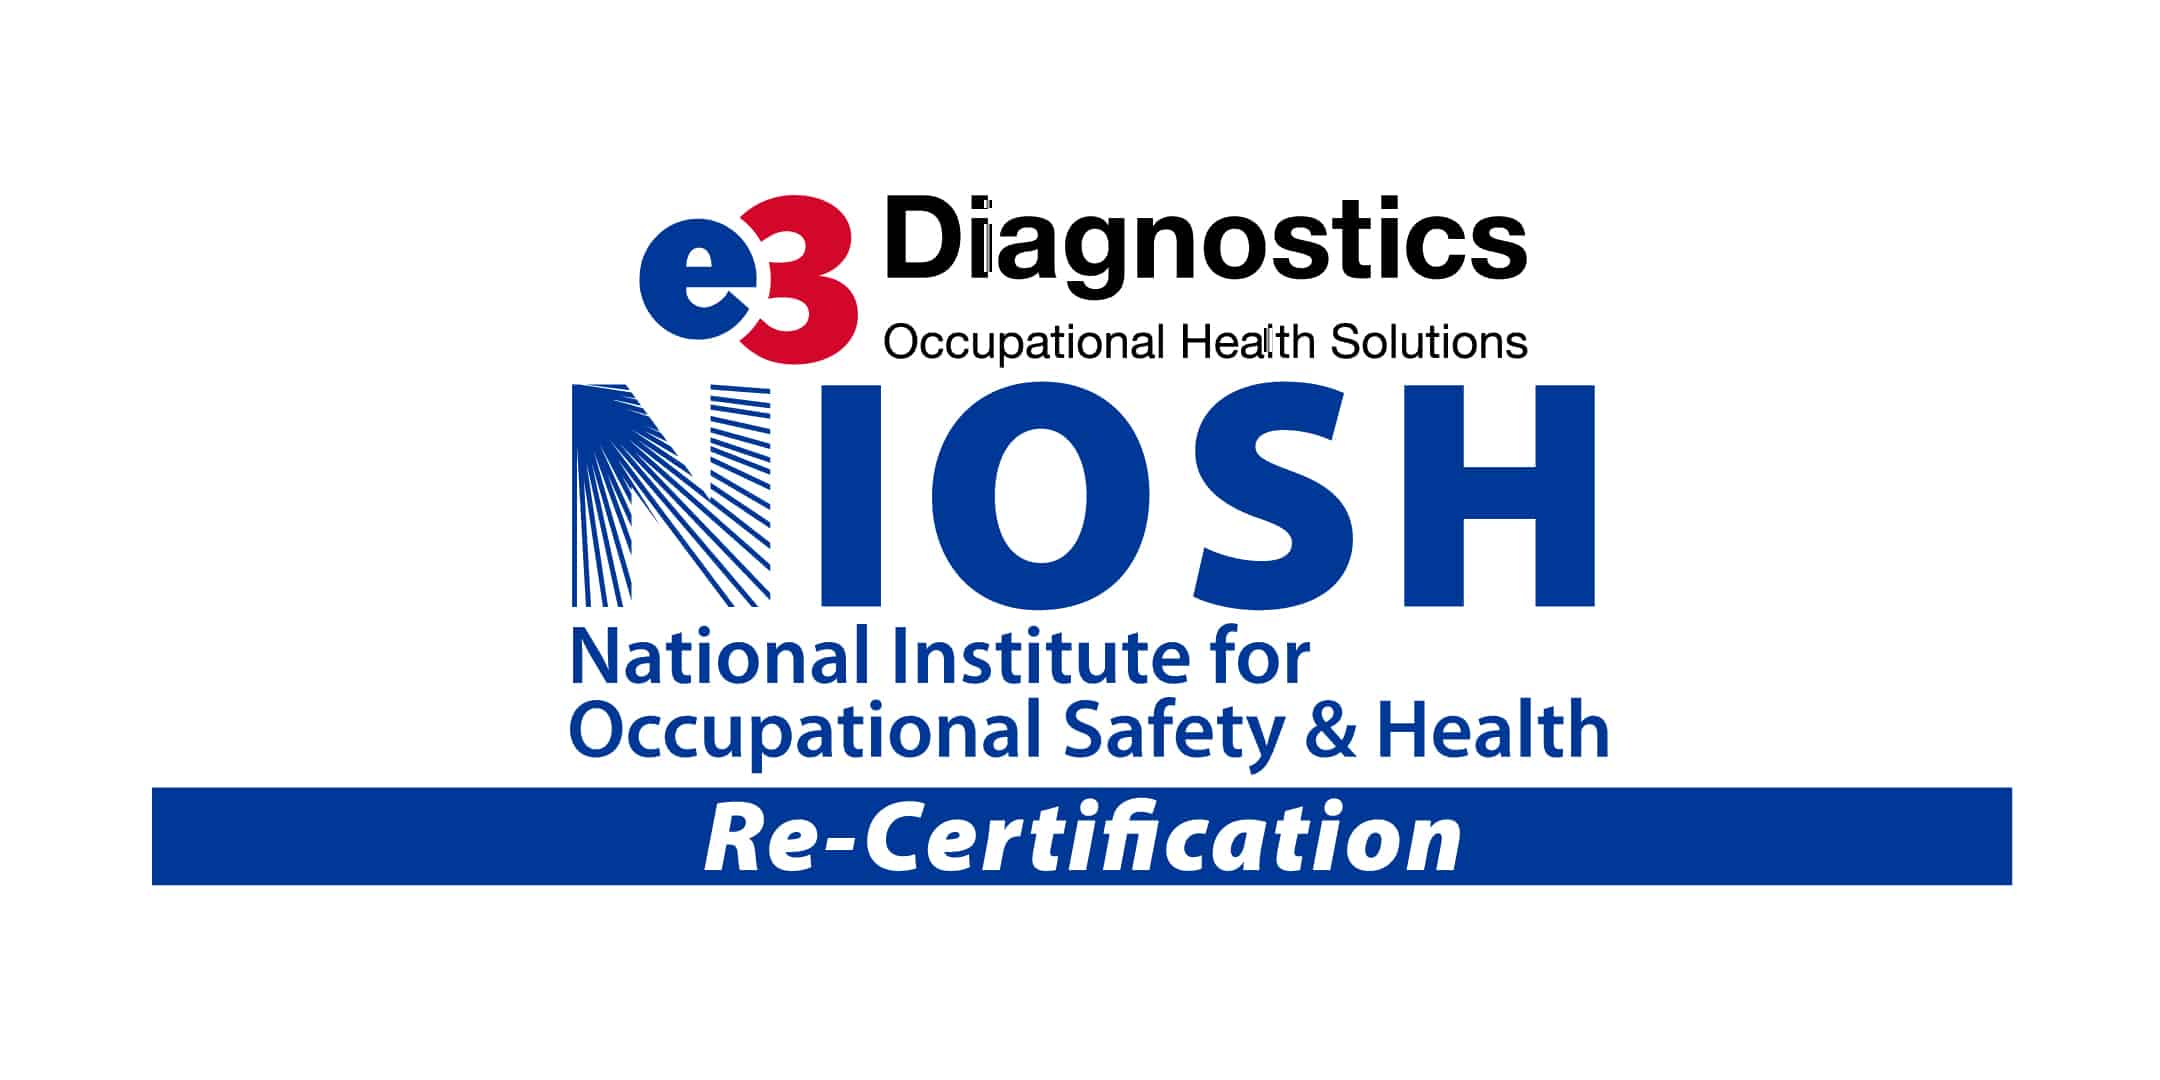 Niosh Re-Certification With E3 Occupational 3